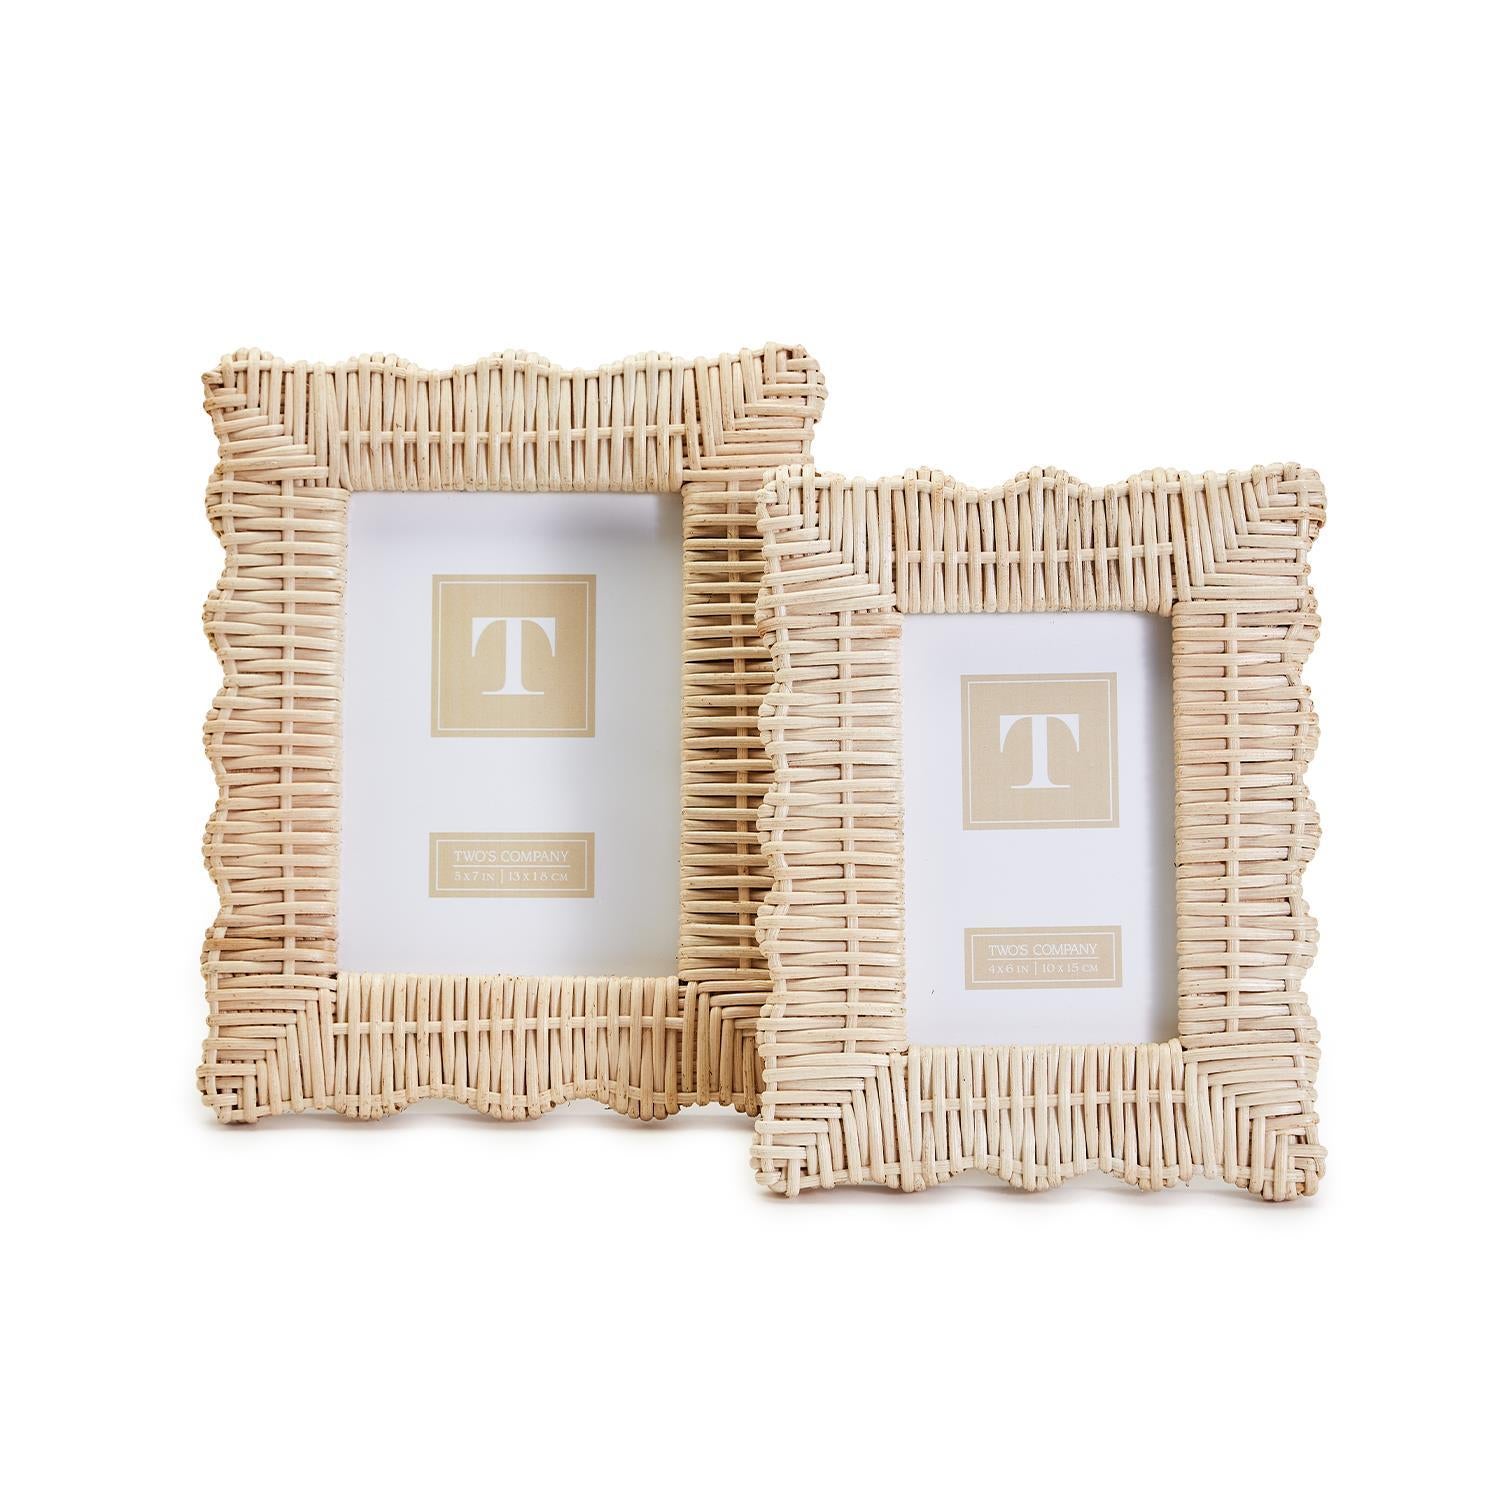 Picture Frame - Wicker Weave